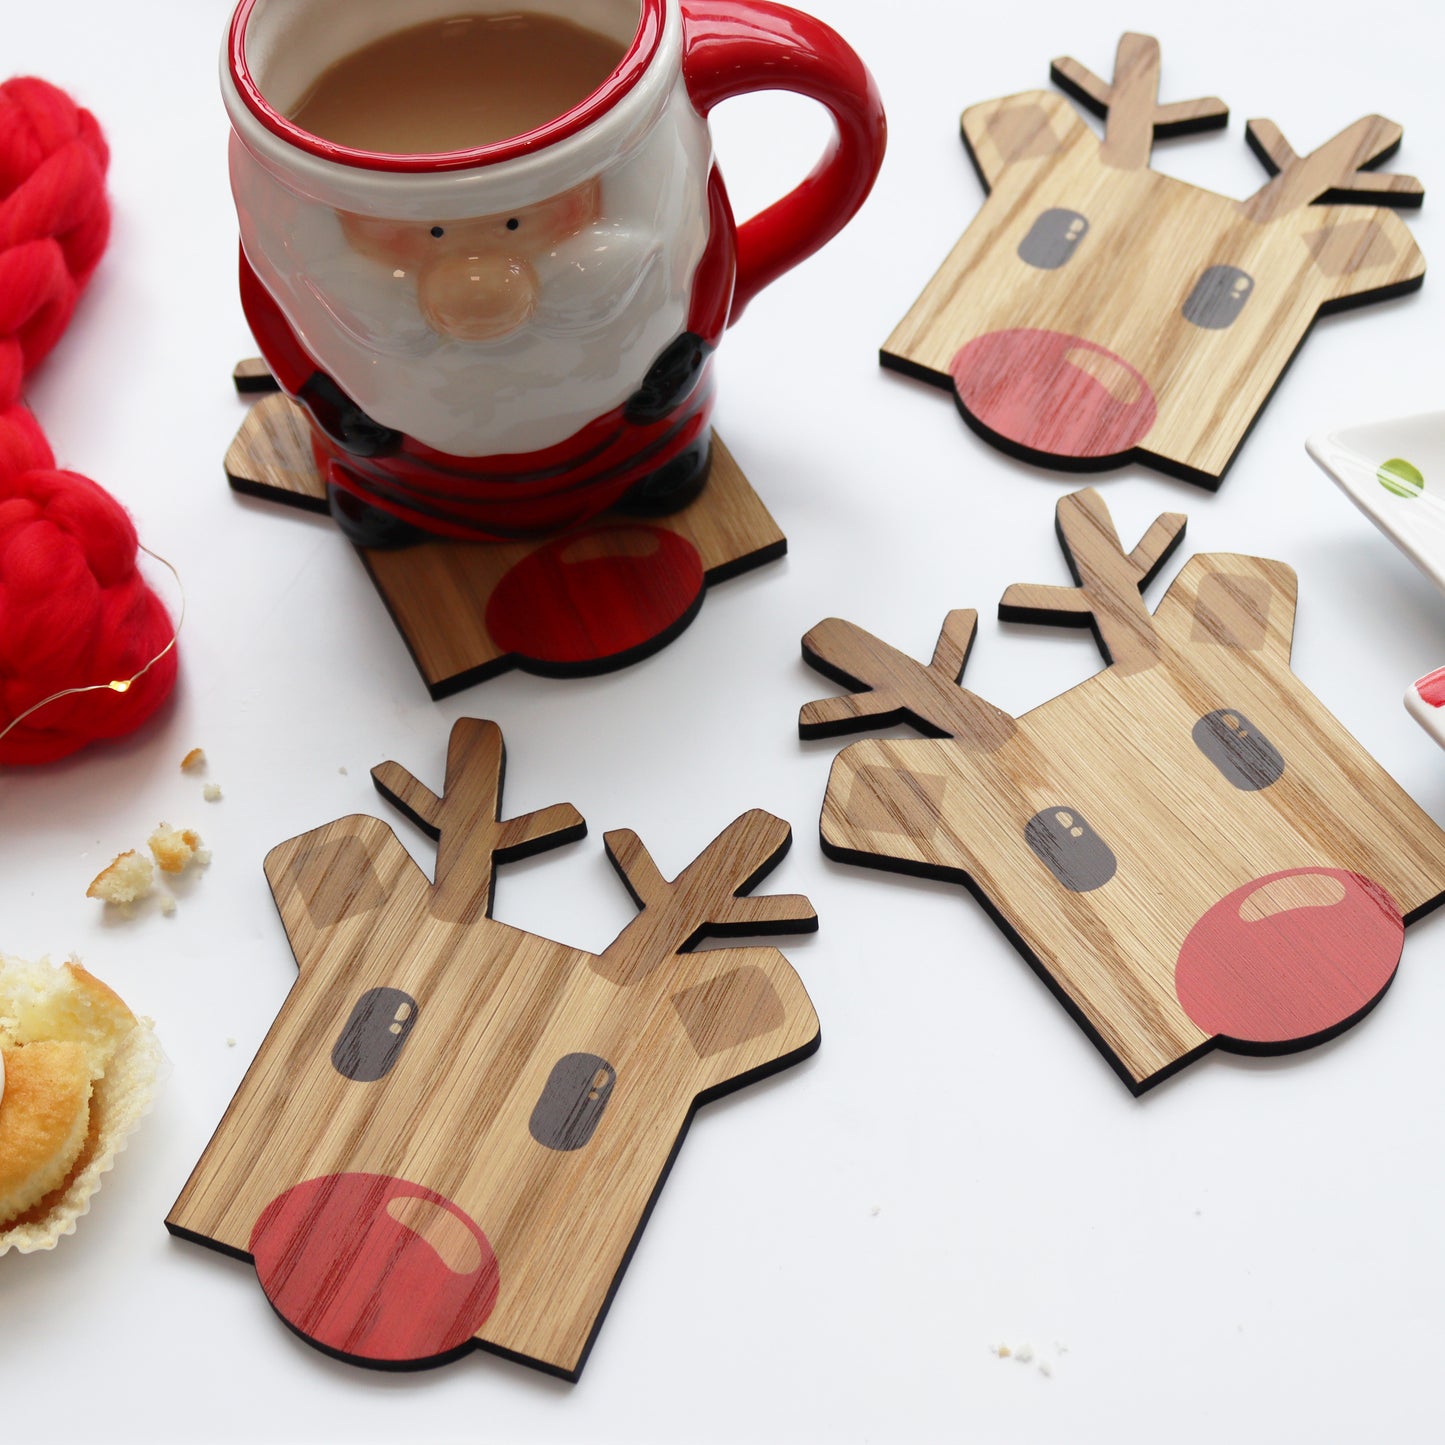 Set Of Four Wooden Rudolph Reindeer Coasters